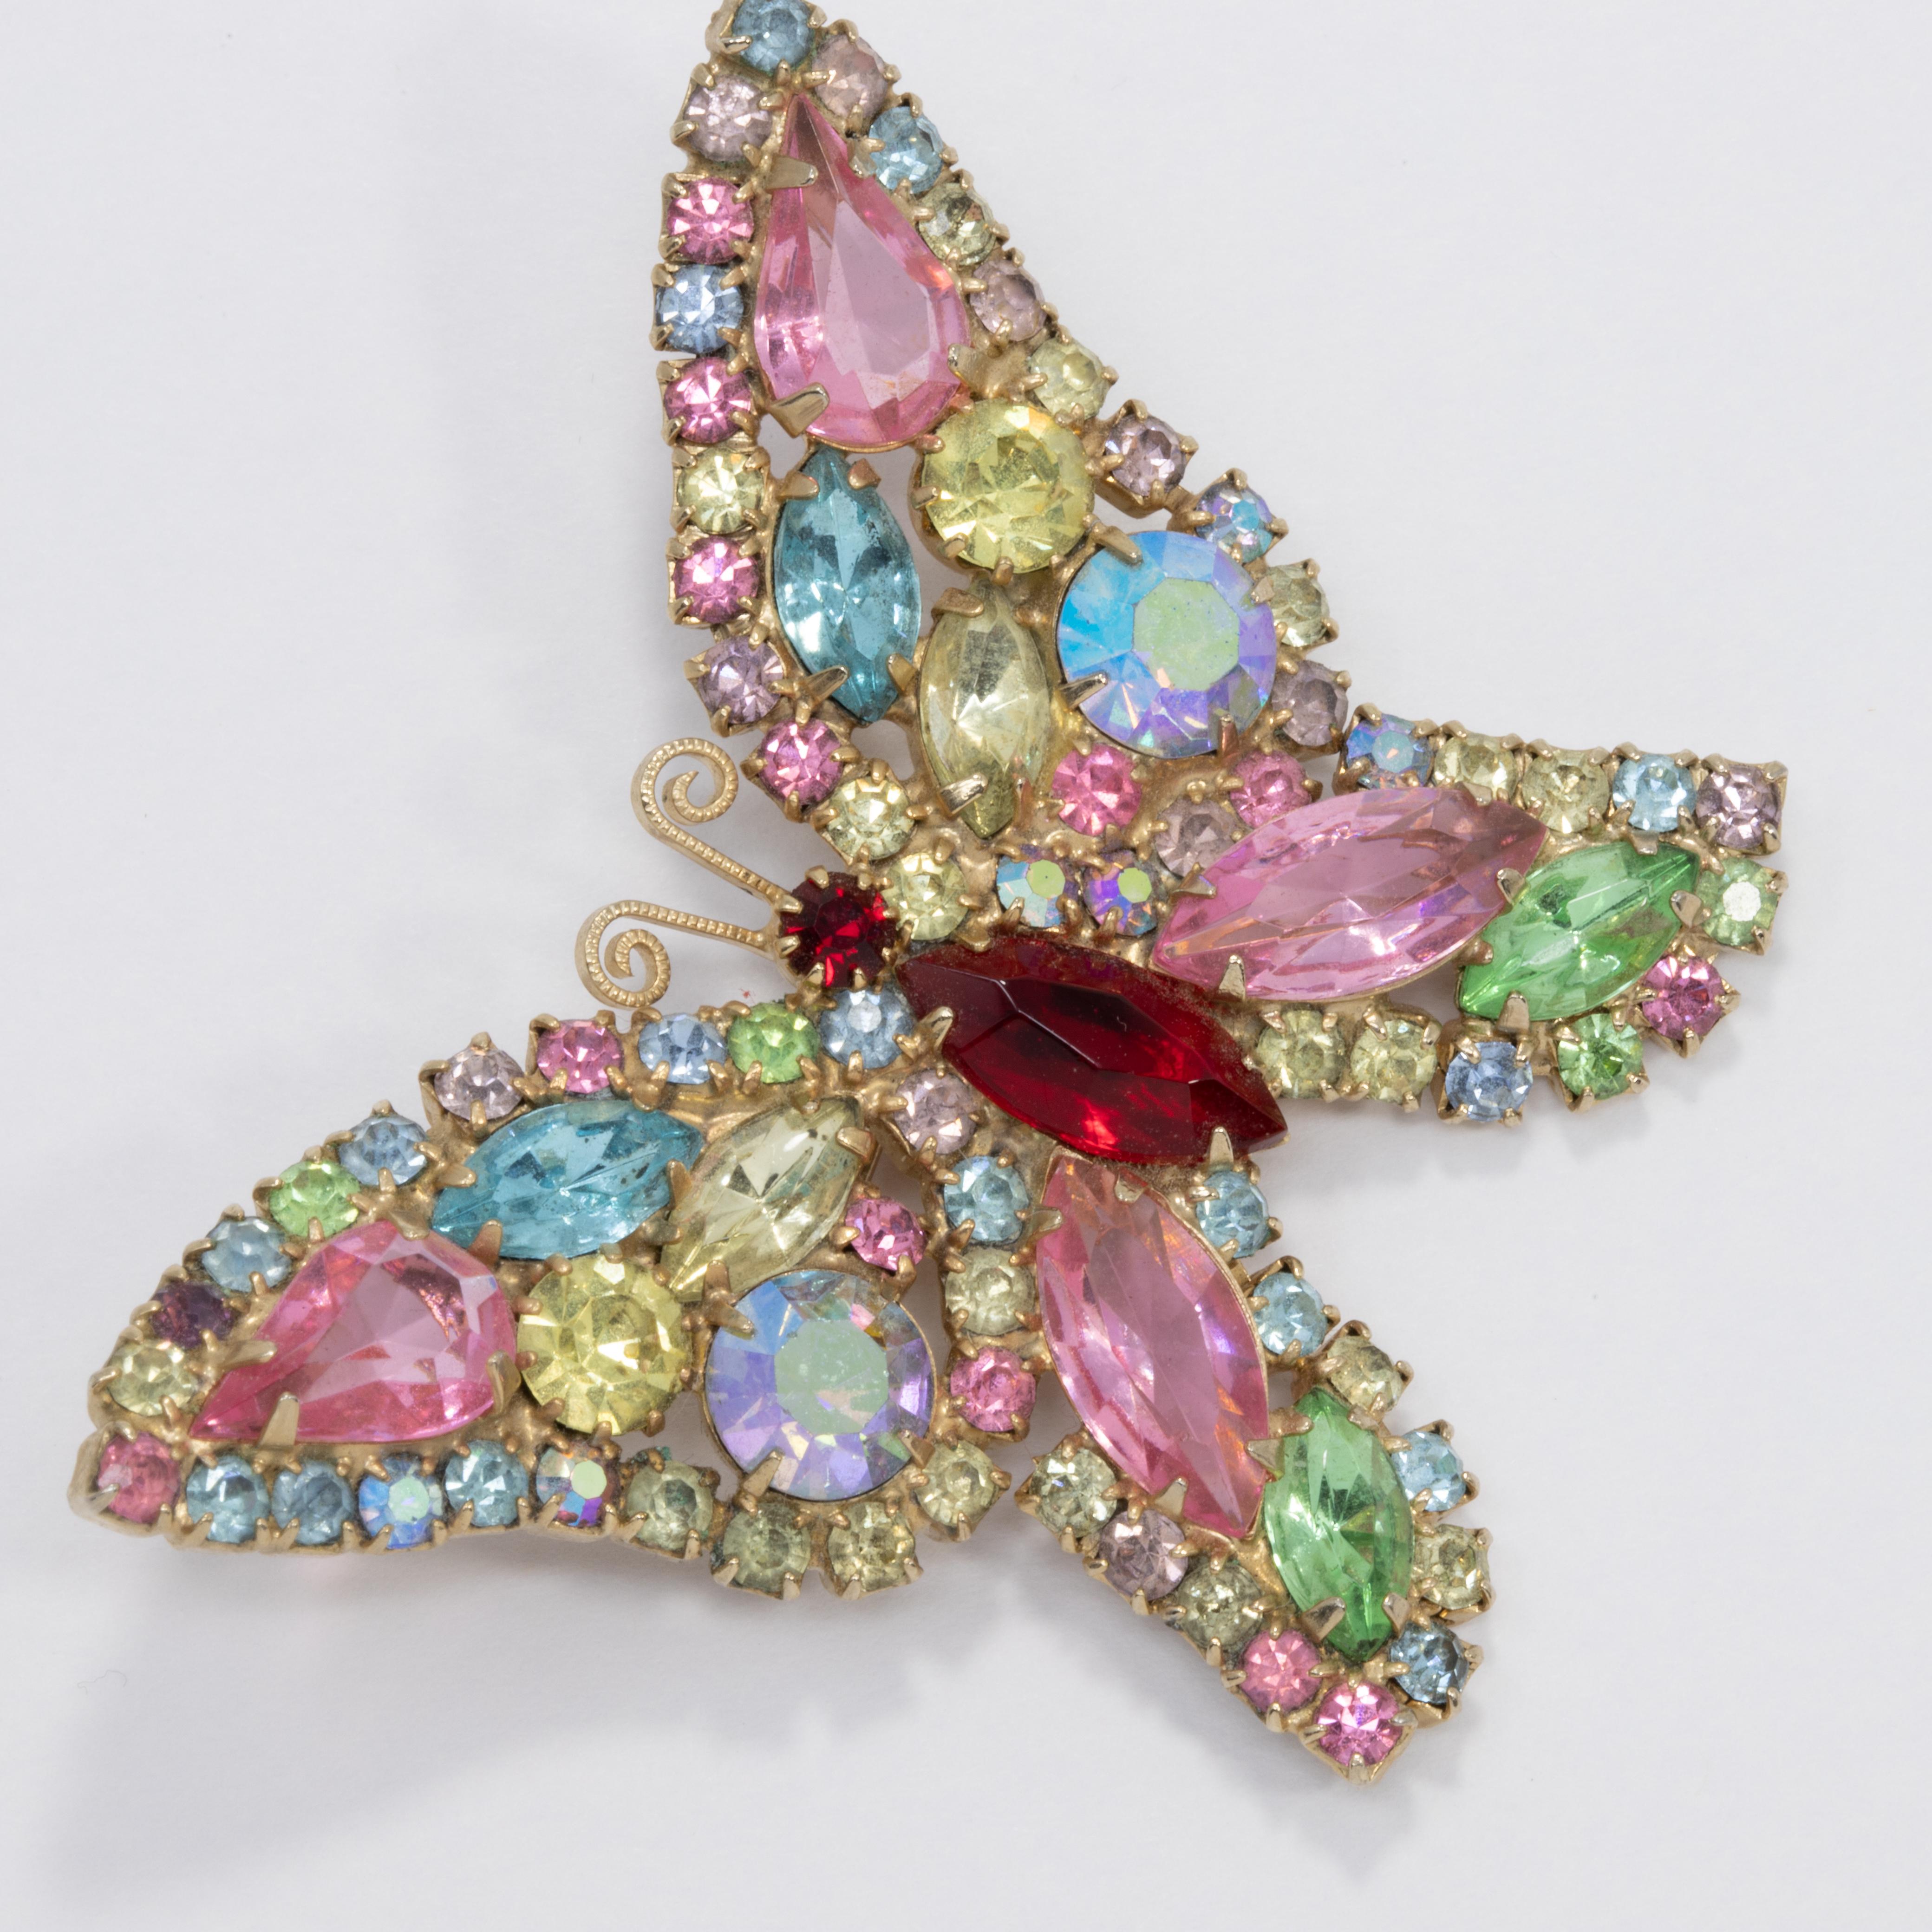 A sparkling butterfly pin brooch decorated with dazzling, prong set crystals. Features glittering peridot, rose, aquamarine, rose, and amber colors on a gold-tone setting.

Hallmarks: WEISS